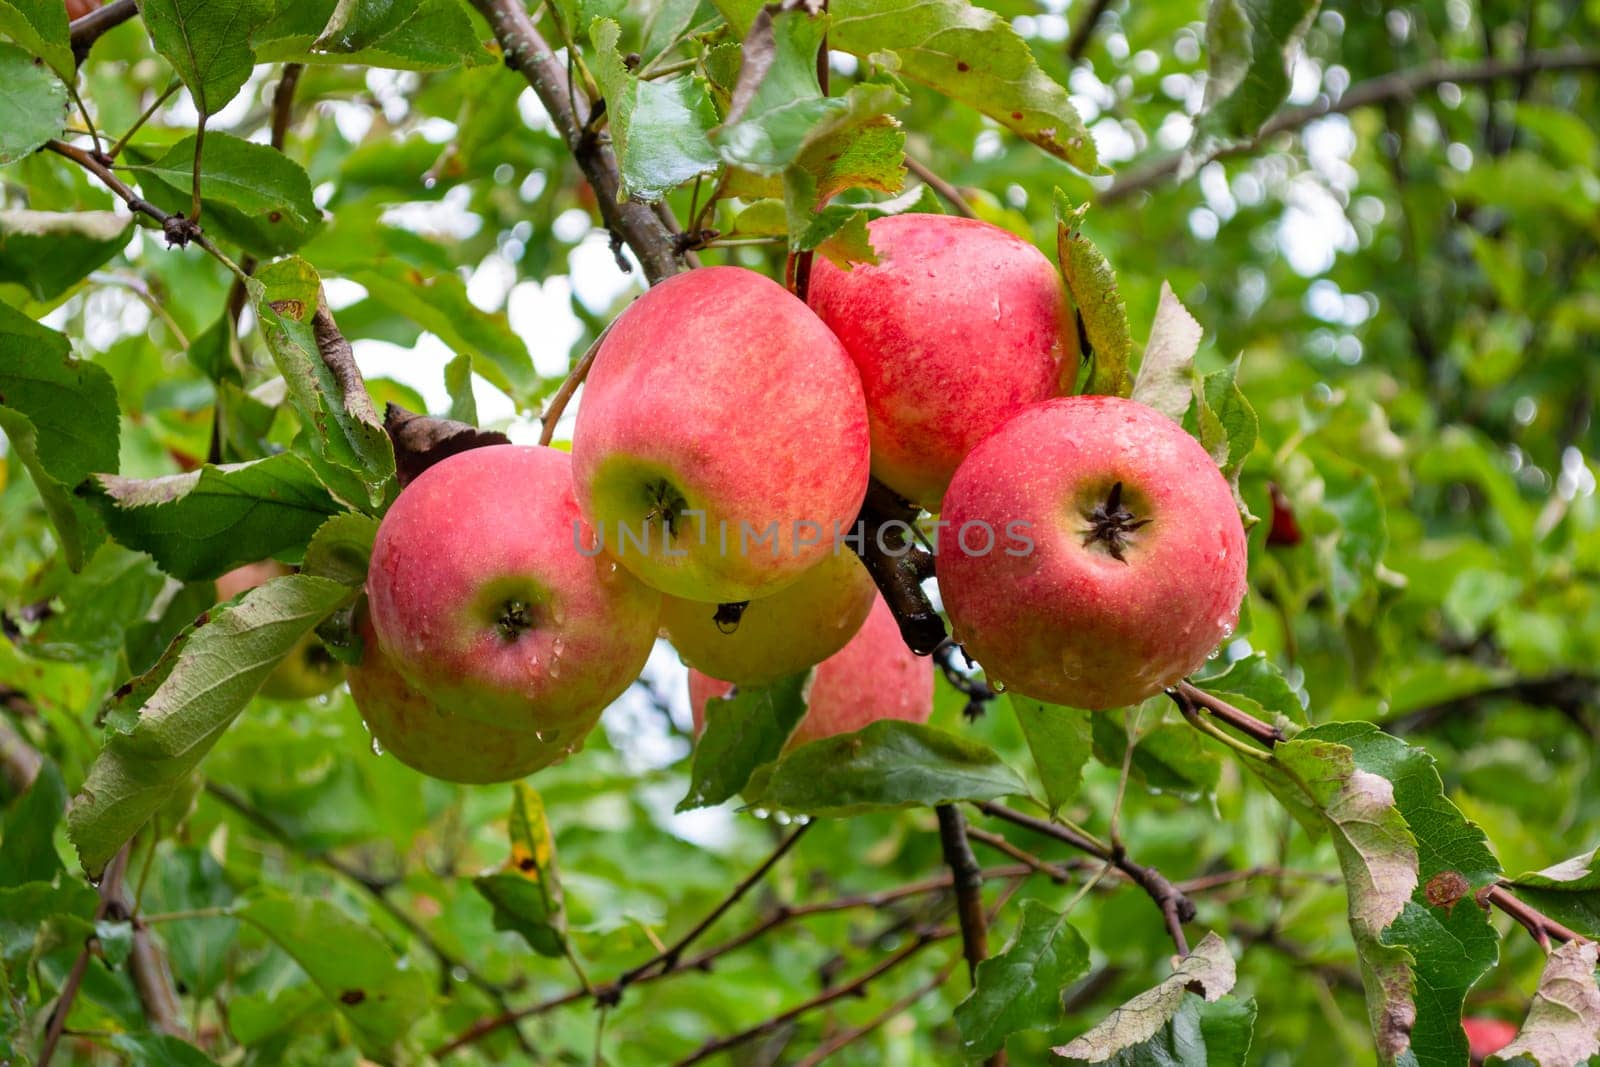 Several ripe apples on a branch in the garden. Five fruits. Harvest season in the garden.